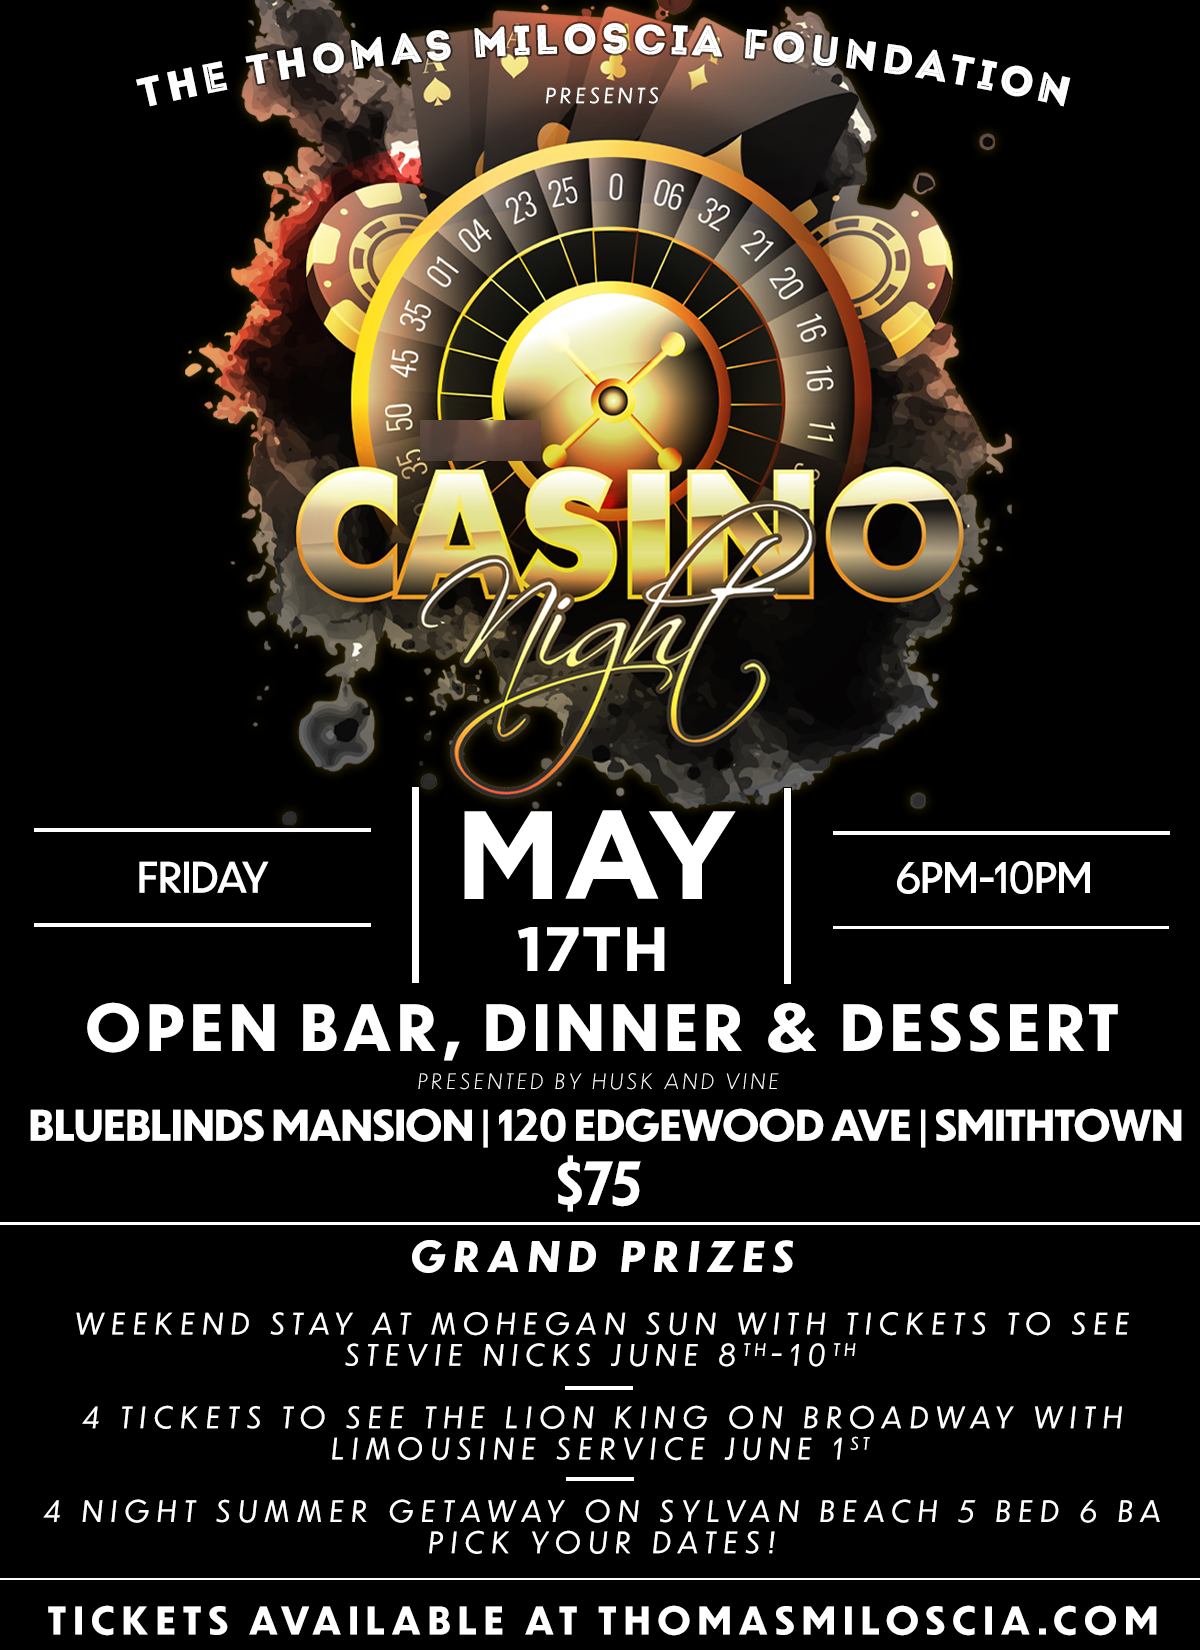 CASINO NIGHT TICKETS AVAILABLE NOW